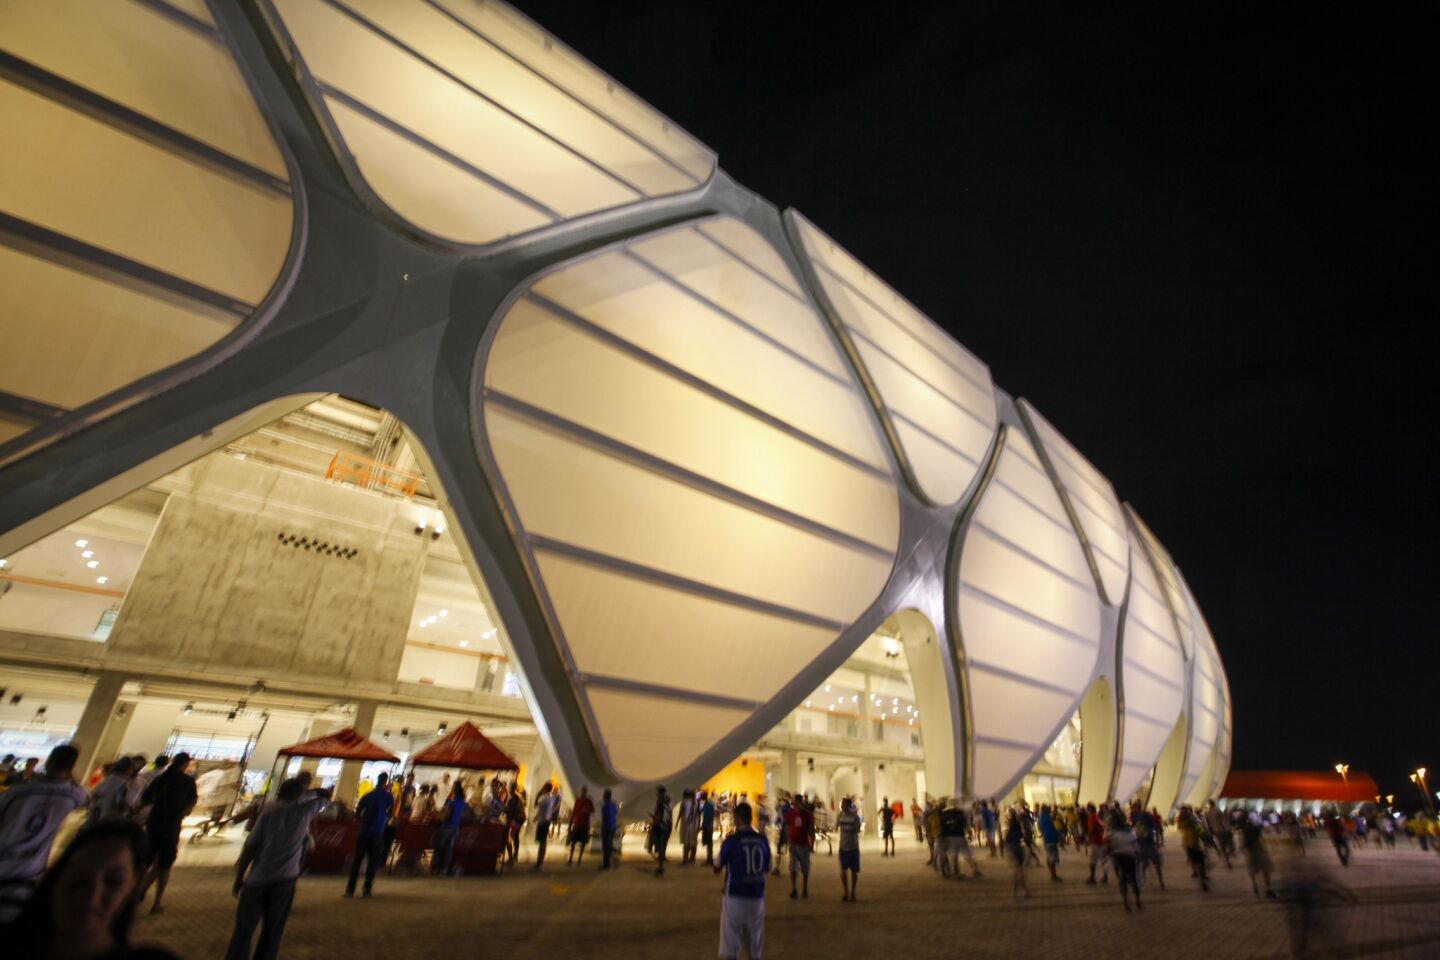 Arena Da Amazonia is a striking structure in Manaus. It was built for the World Cup in a city with no major league team.